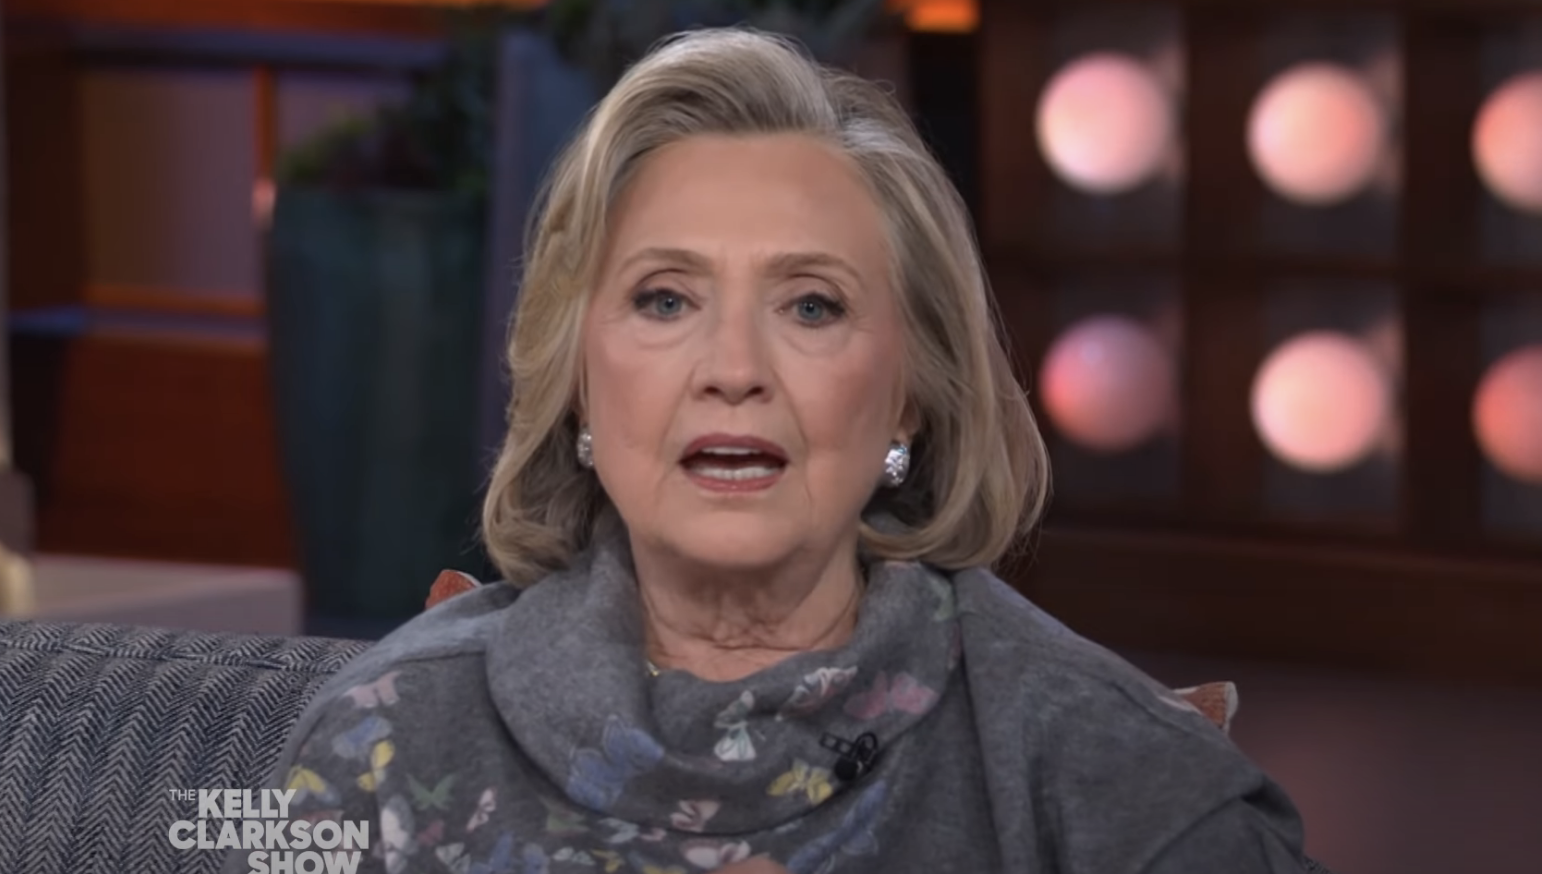 Hillary Clinton wearing a jacket and scarf, seated on the talk show